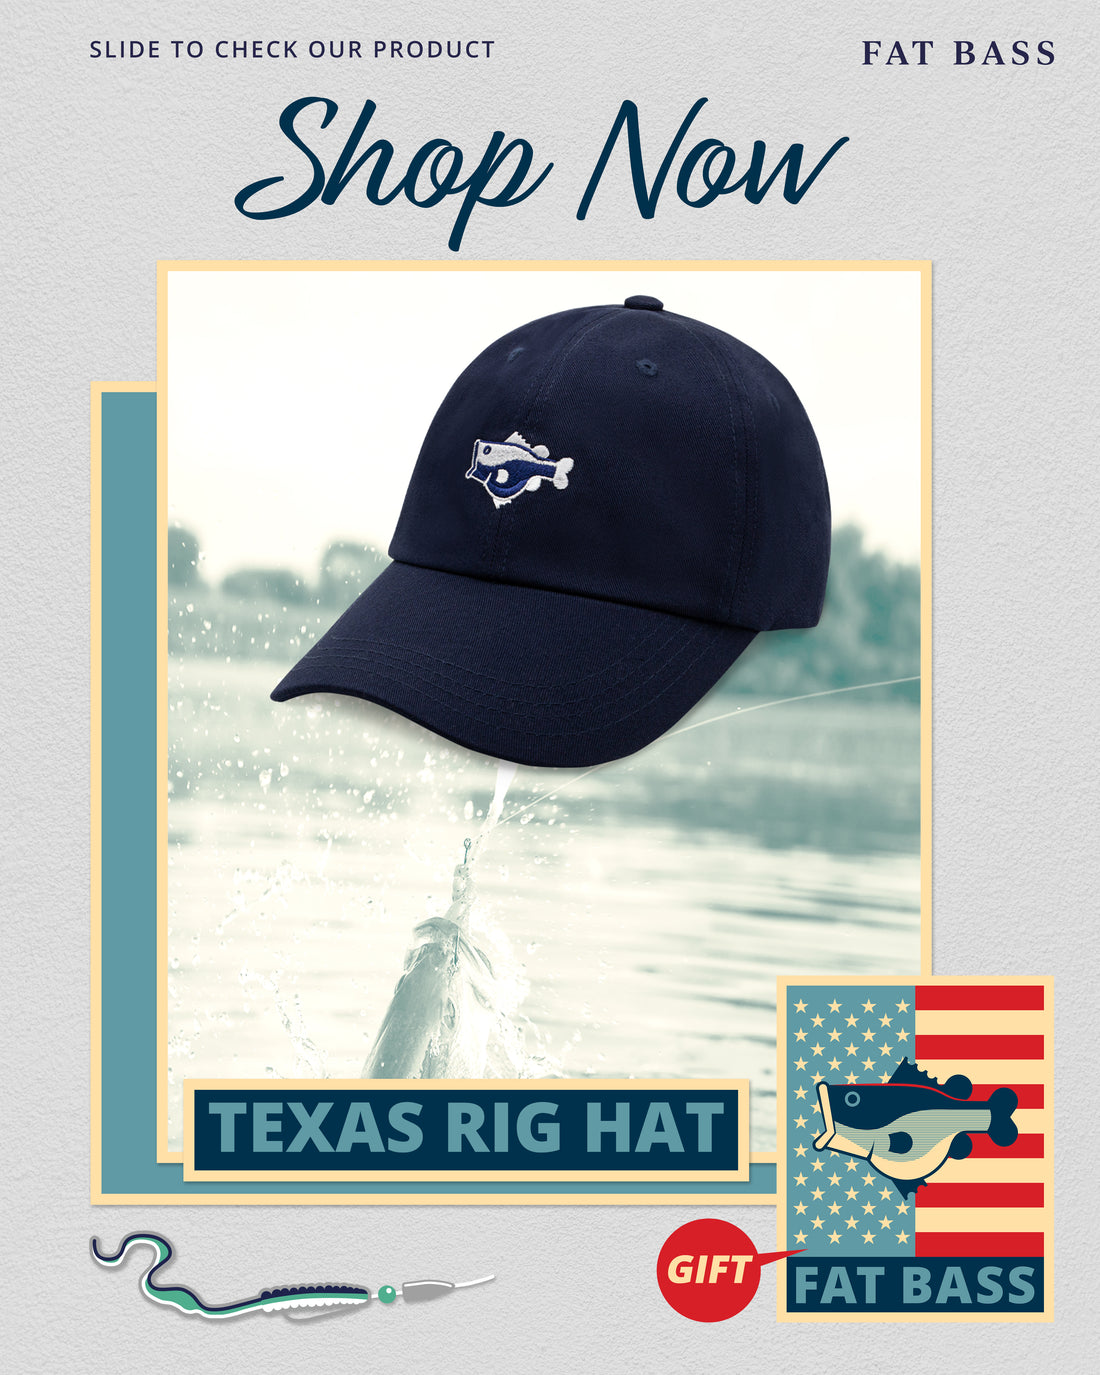 Newly Released! 🔥  Fat Bass “Texas Rig” hat